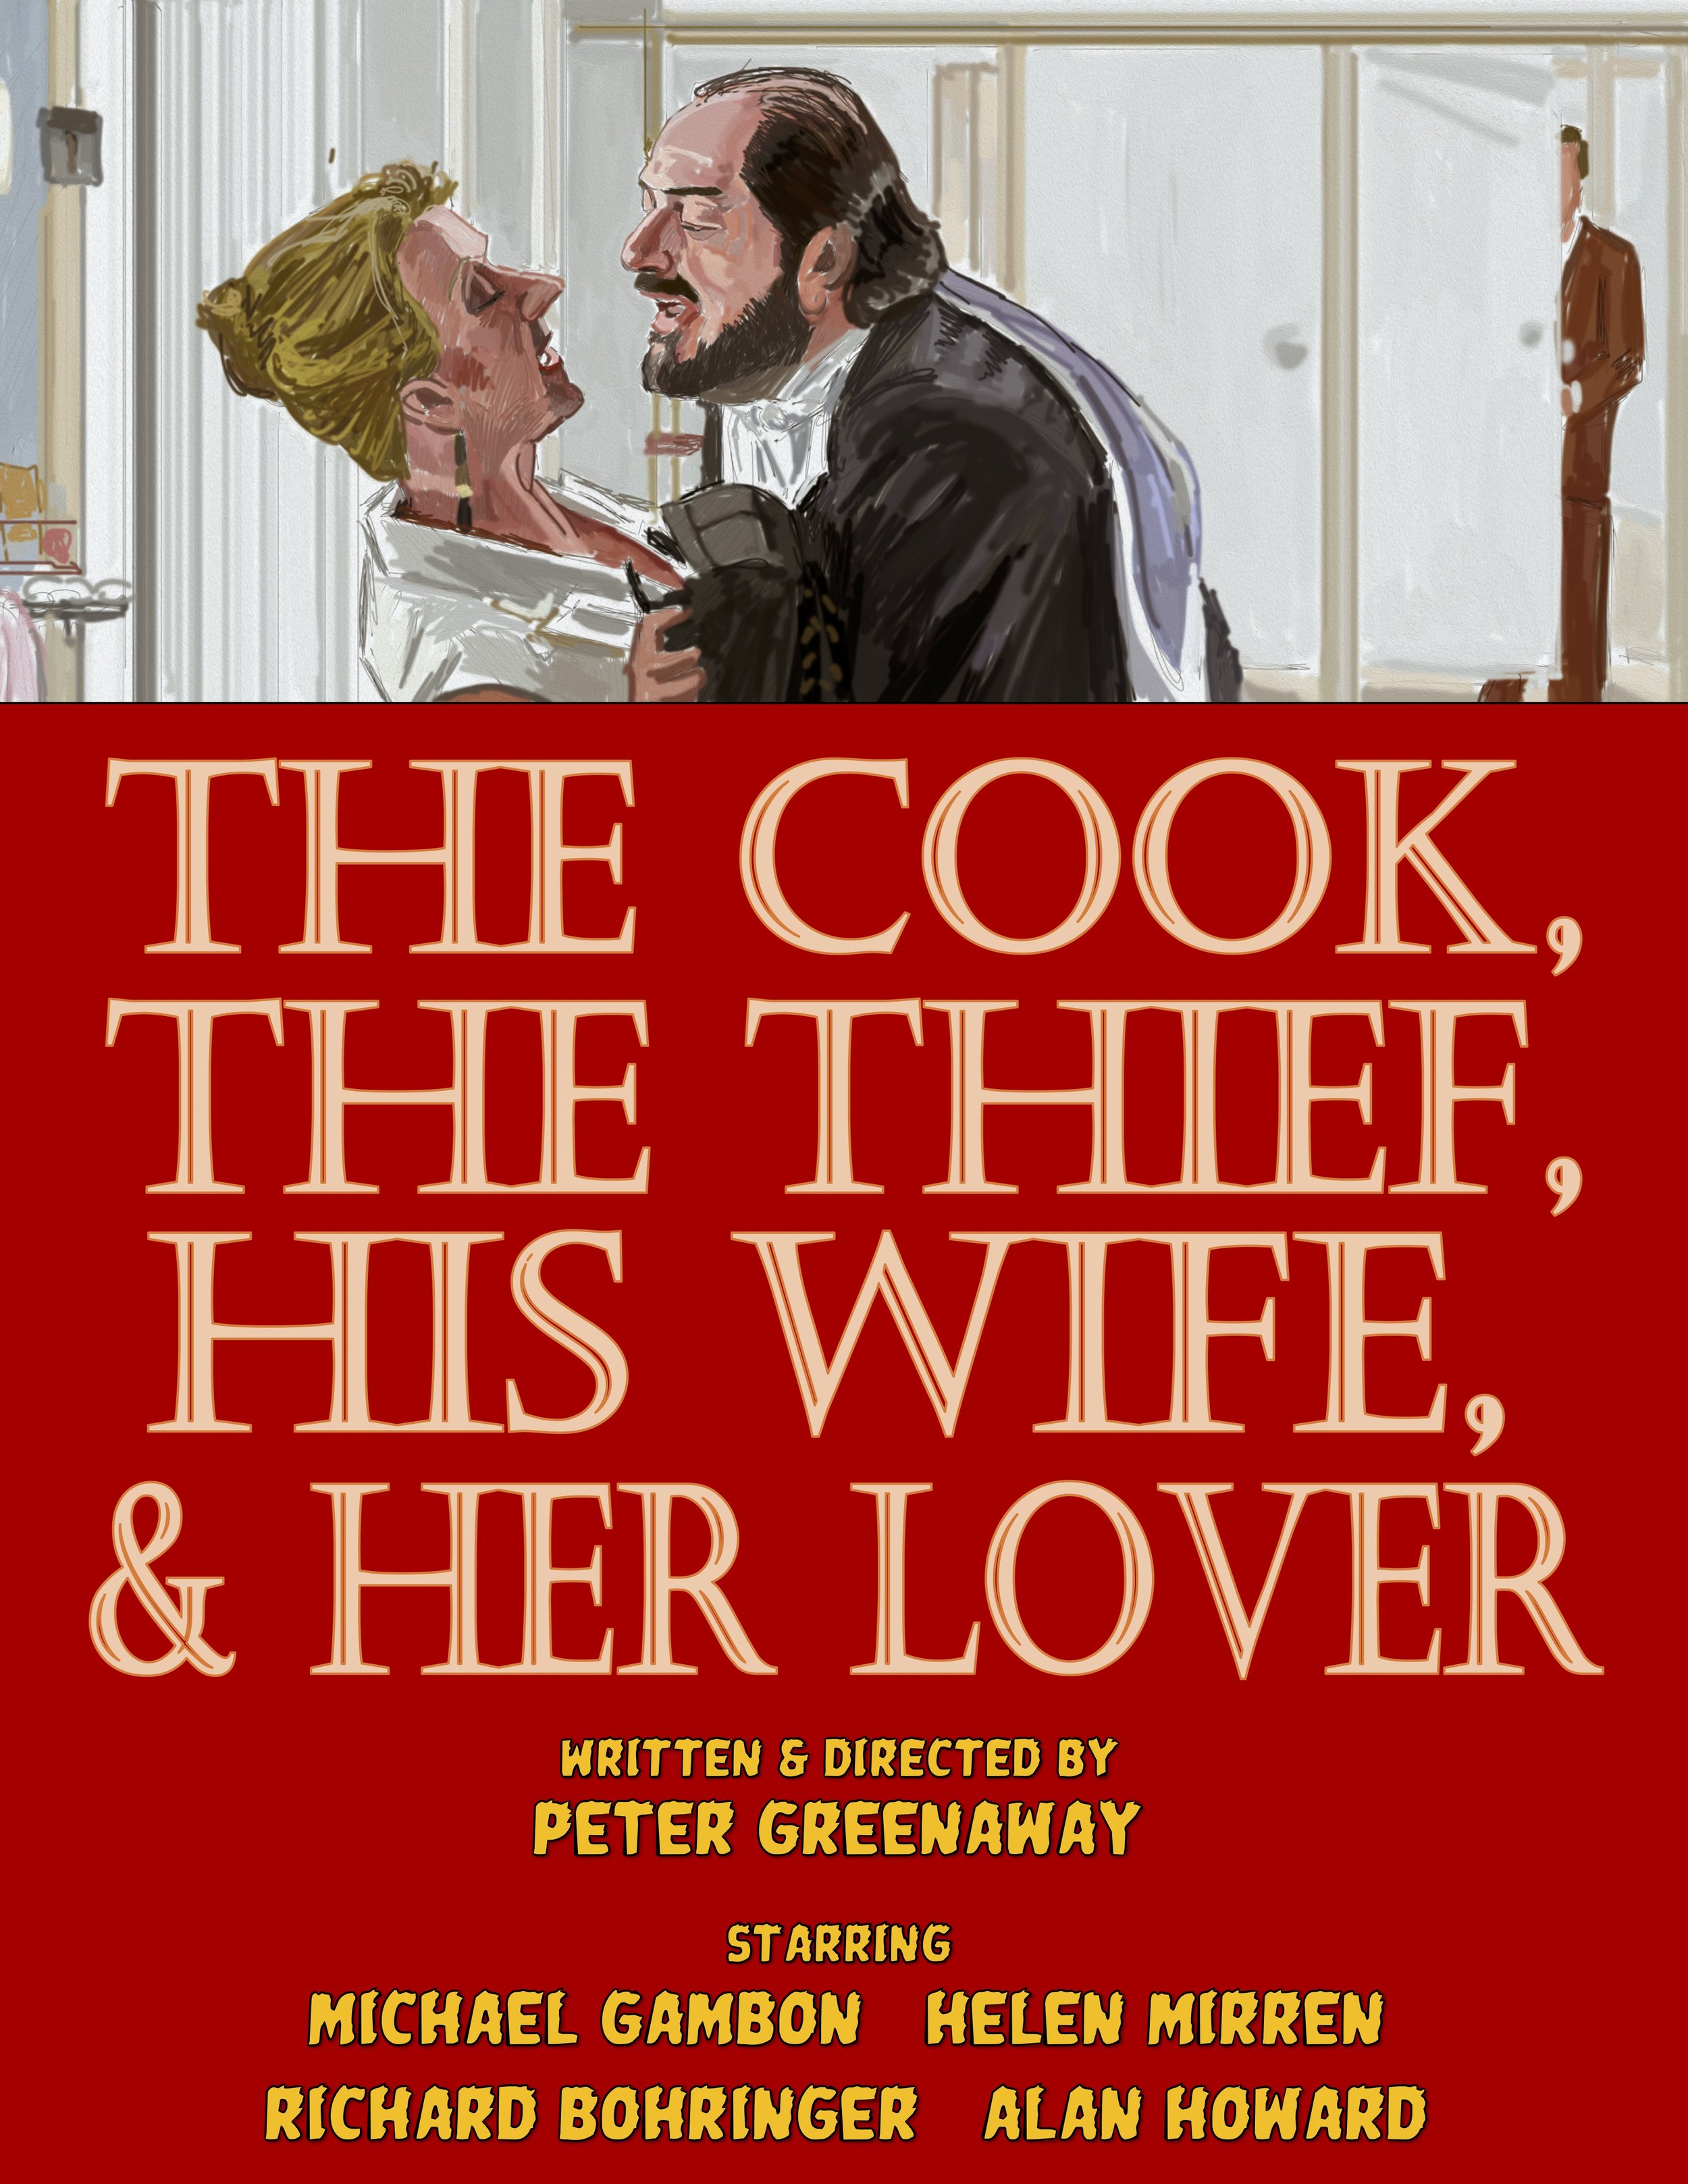 The Cook, The Thief, His Wife &amp; Her Lover (1989)